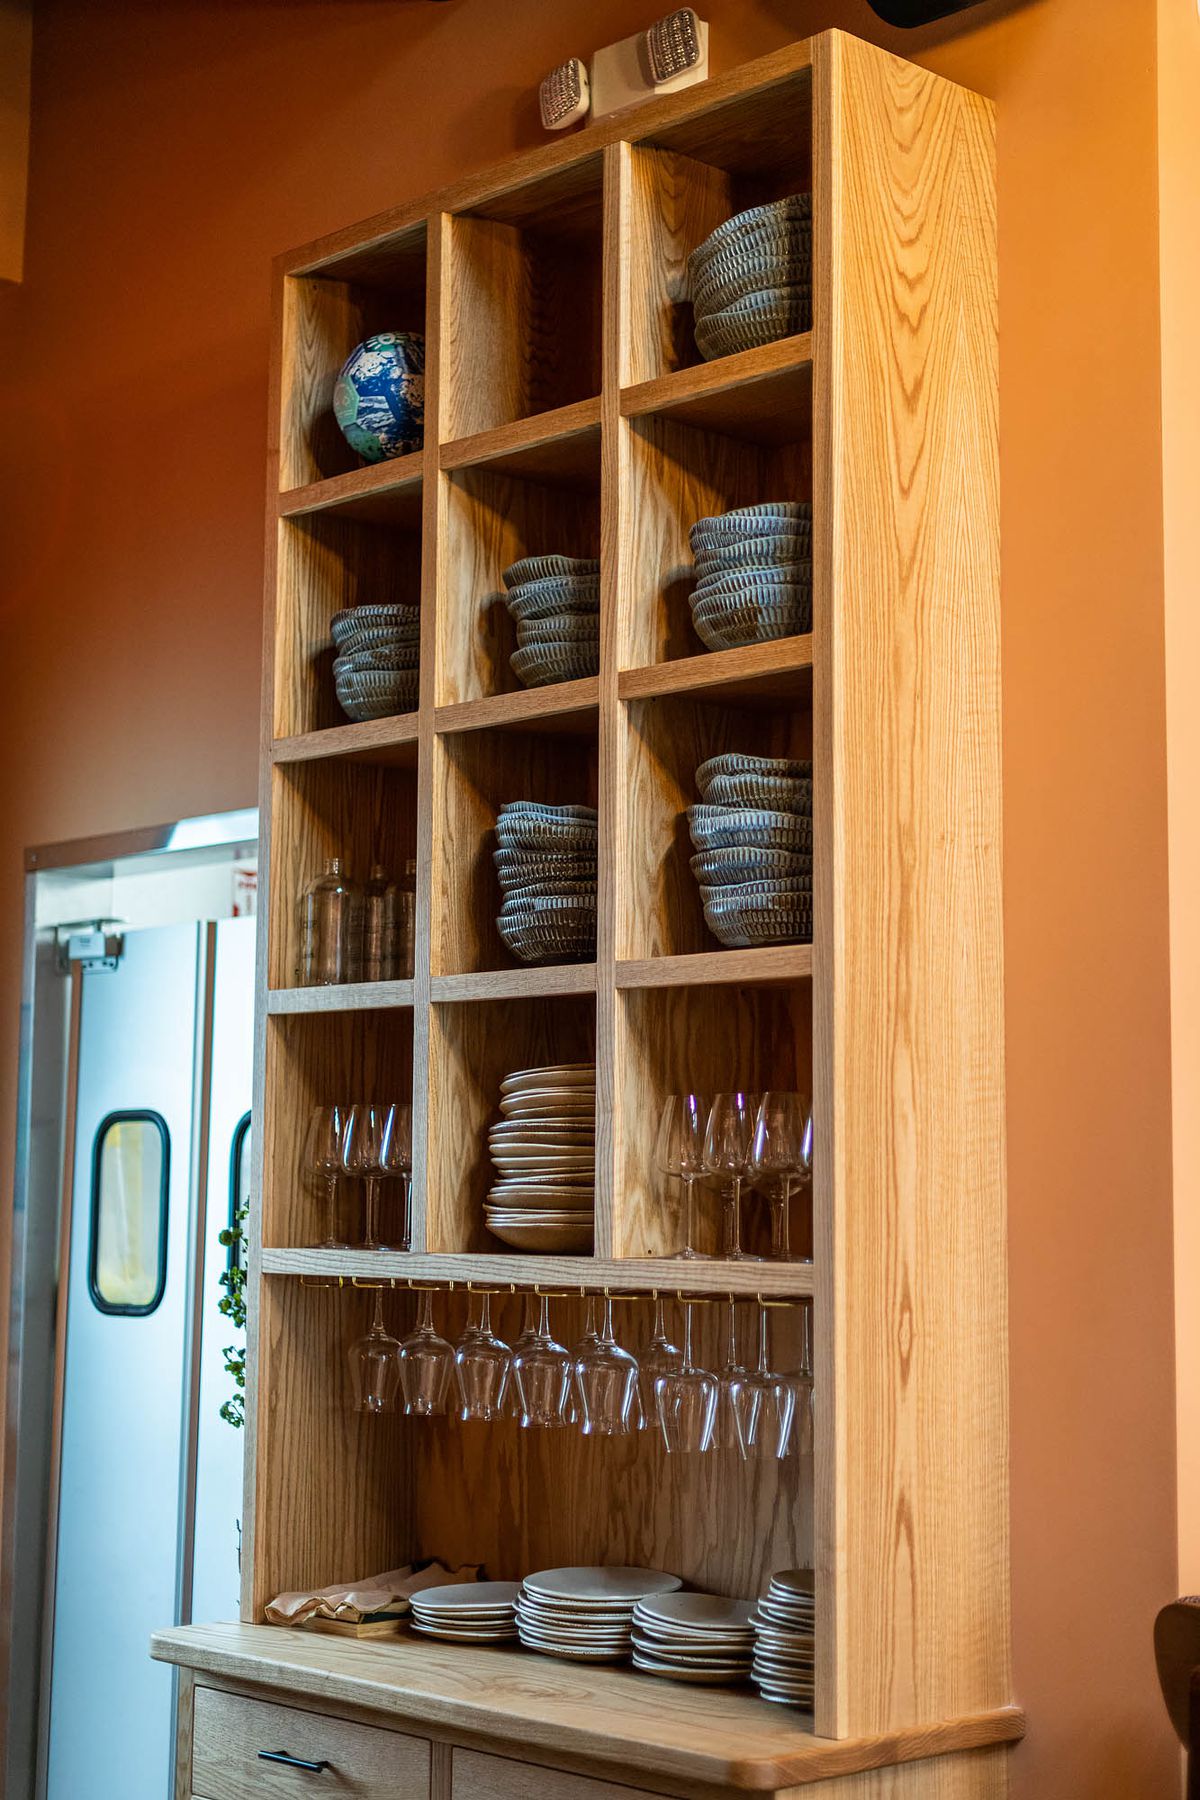 Bowls and plates stacked inside of wooden shelves at a restaurant.